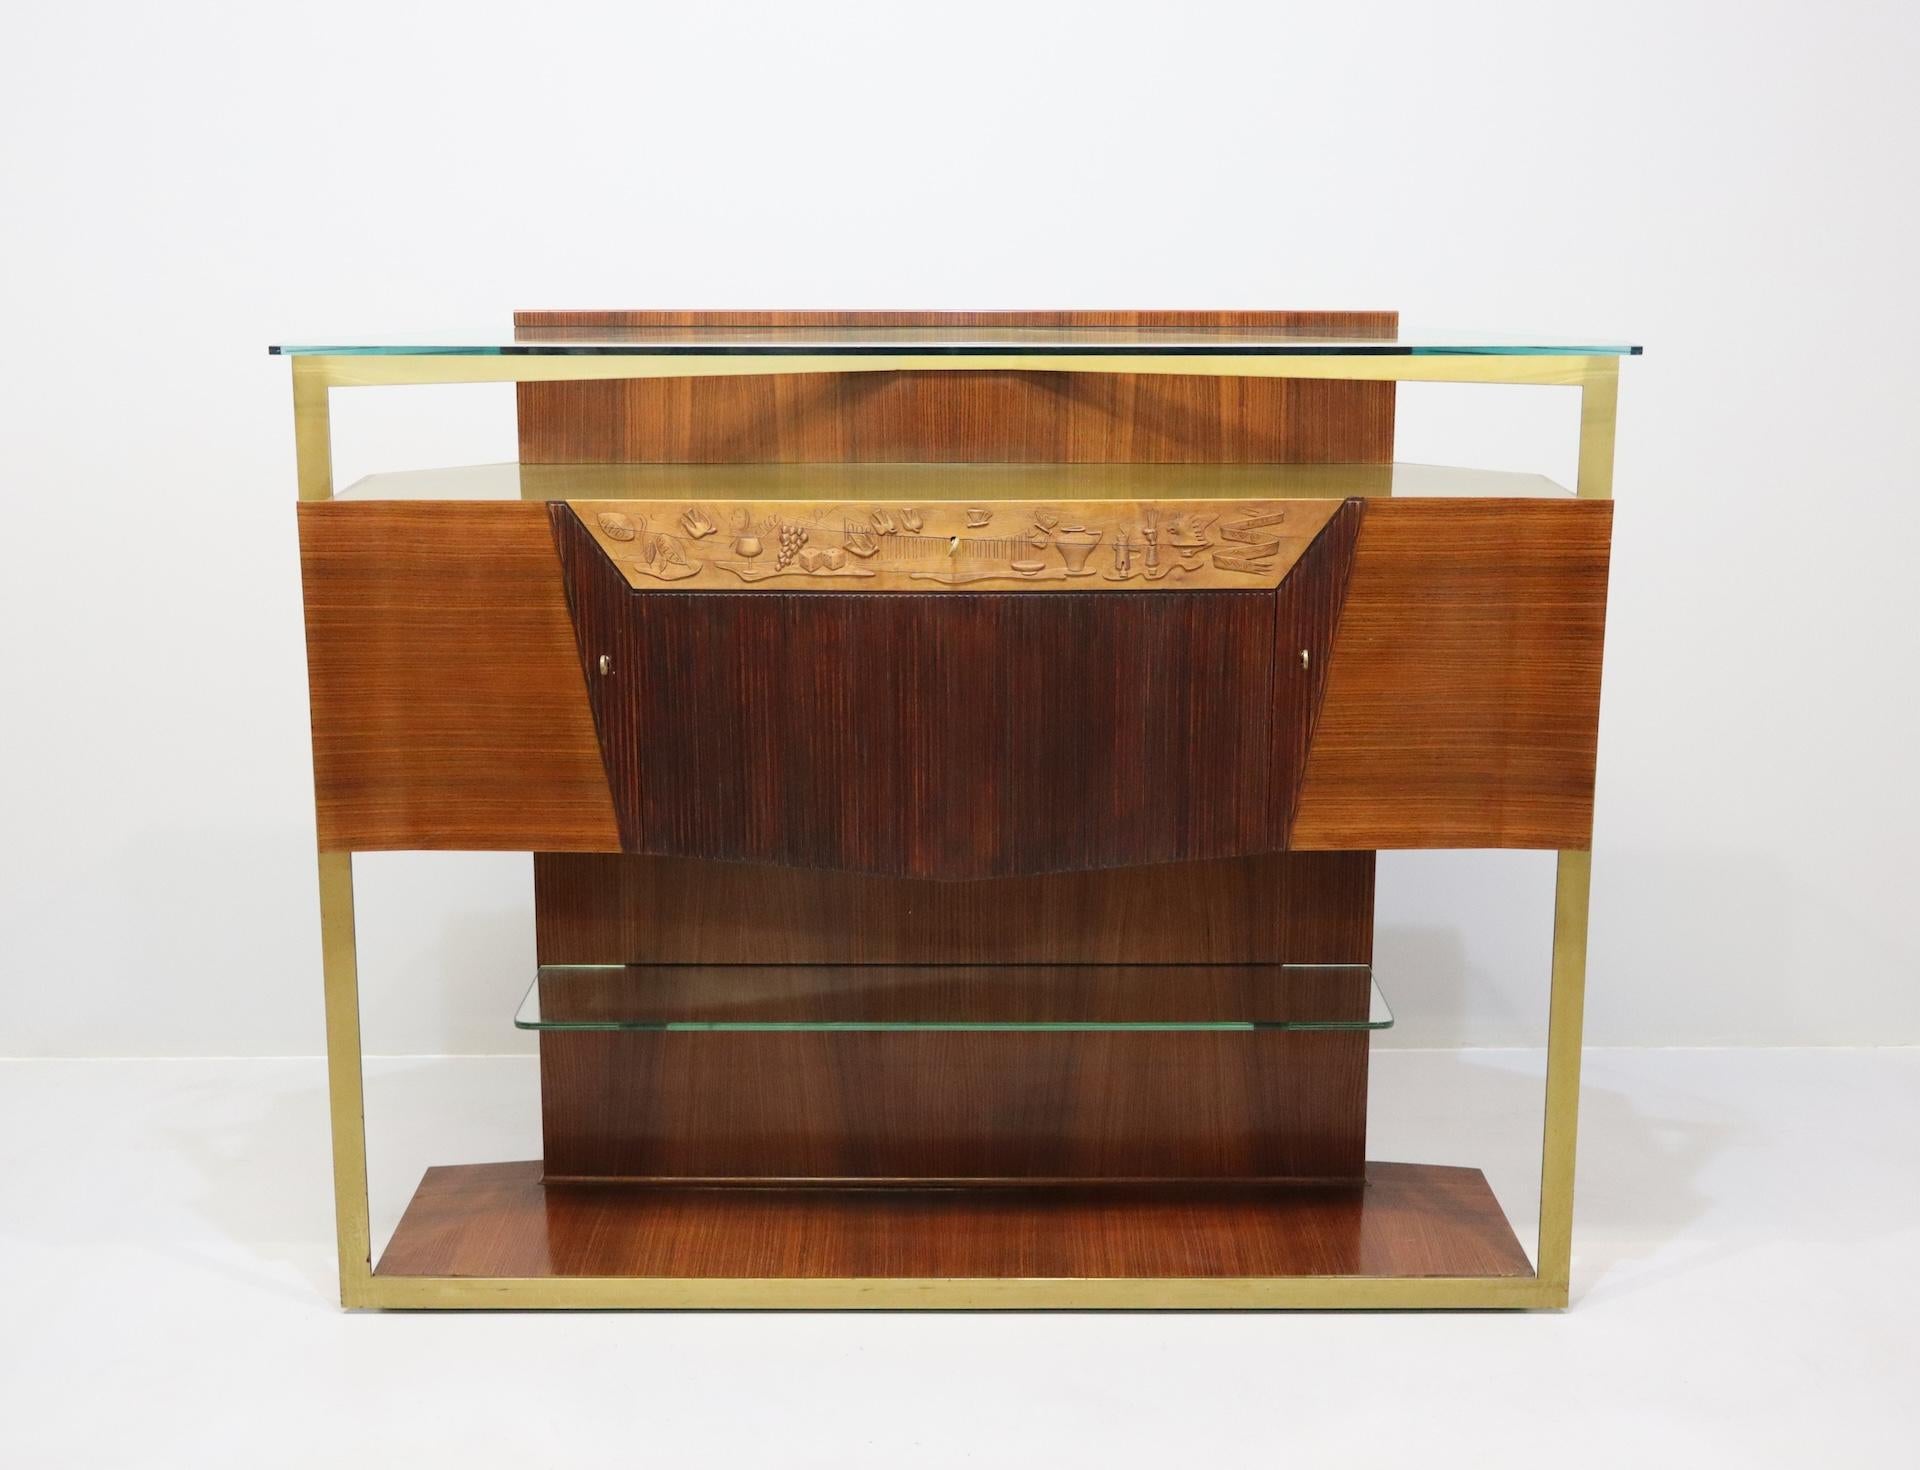 Italian Midcentury Rosewood Sideboard or Bar Cabinet by Vittorio Dassi, 1950s For Sale 9